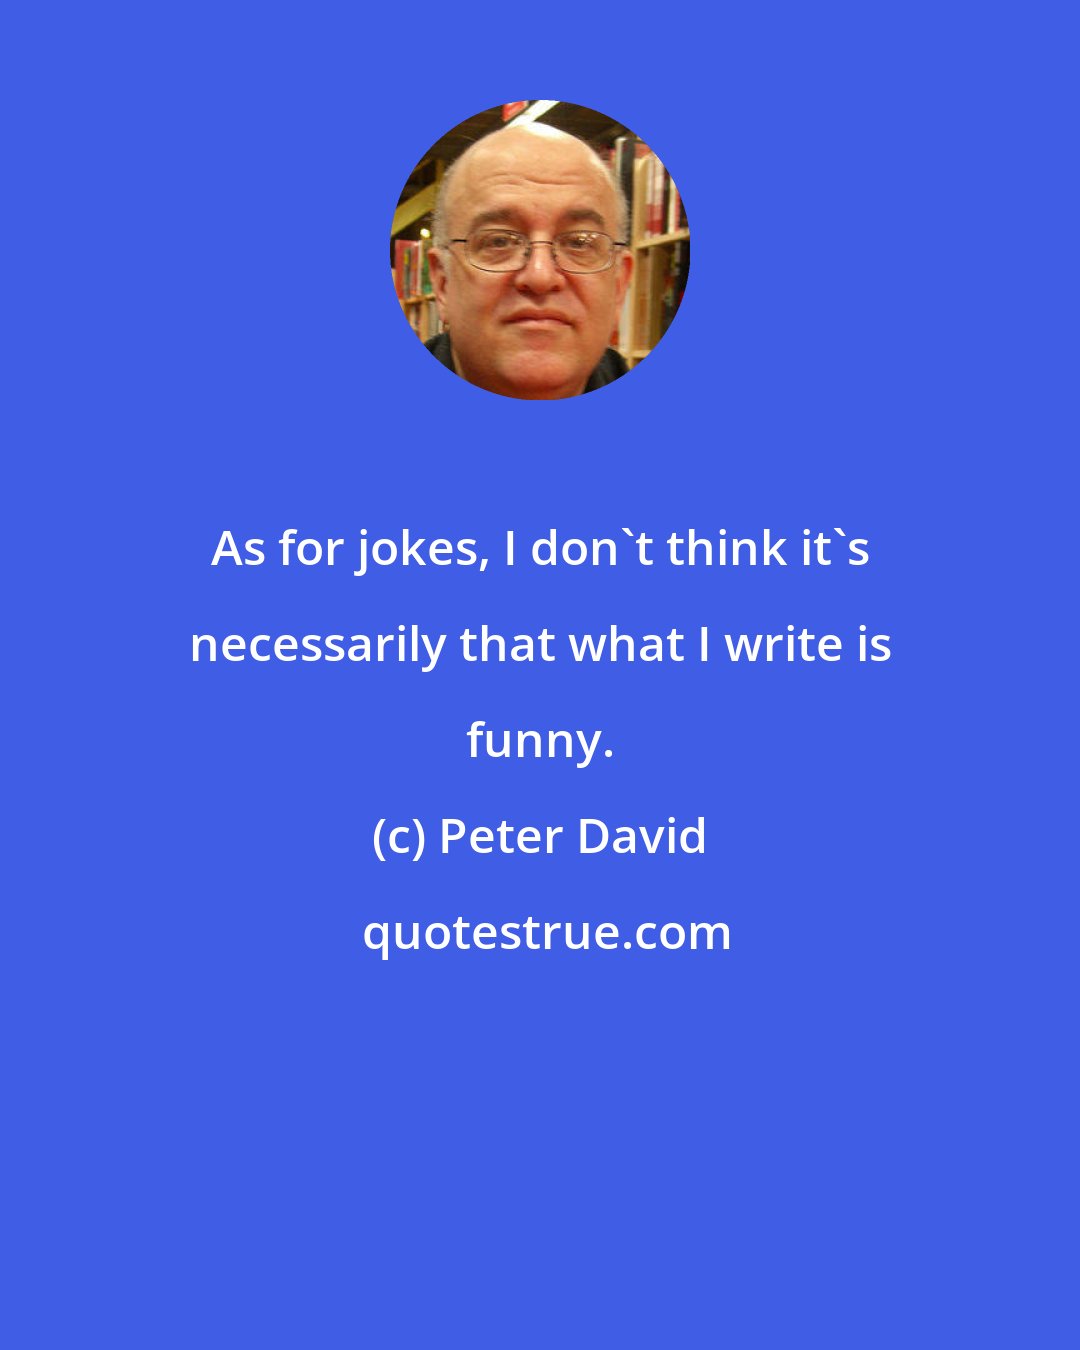 Peter David: As for jokes, I don't think it's necessarily that what I write is funny.